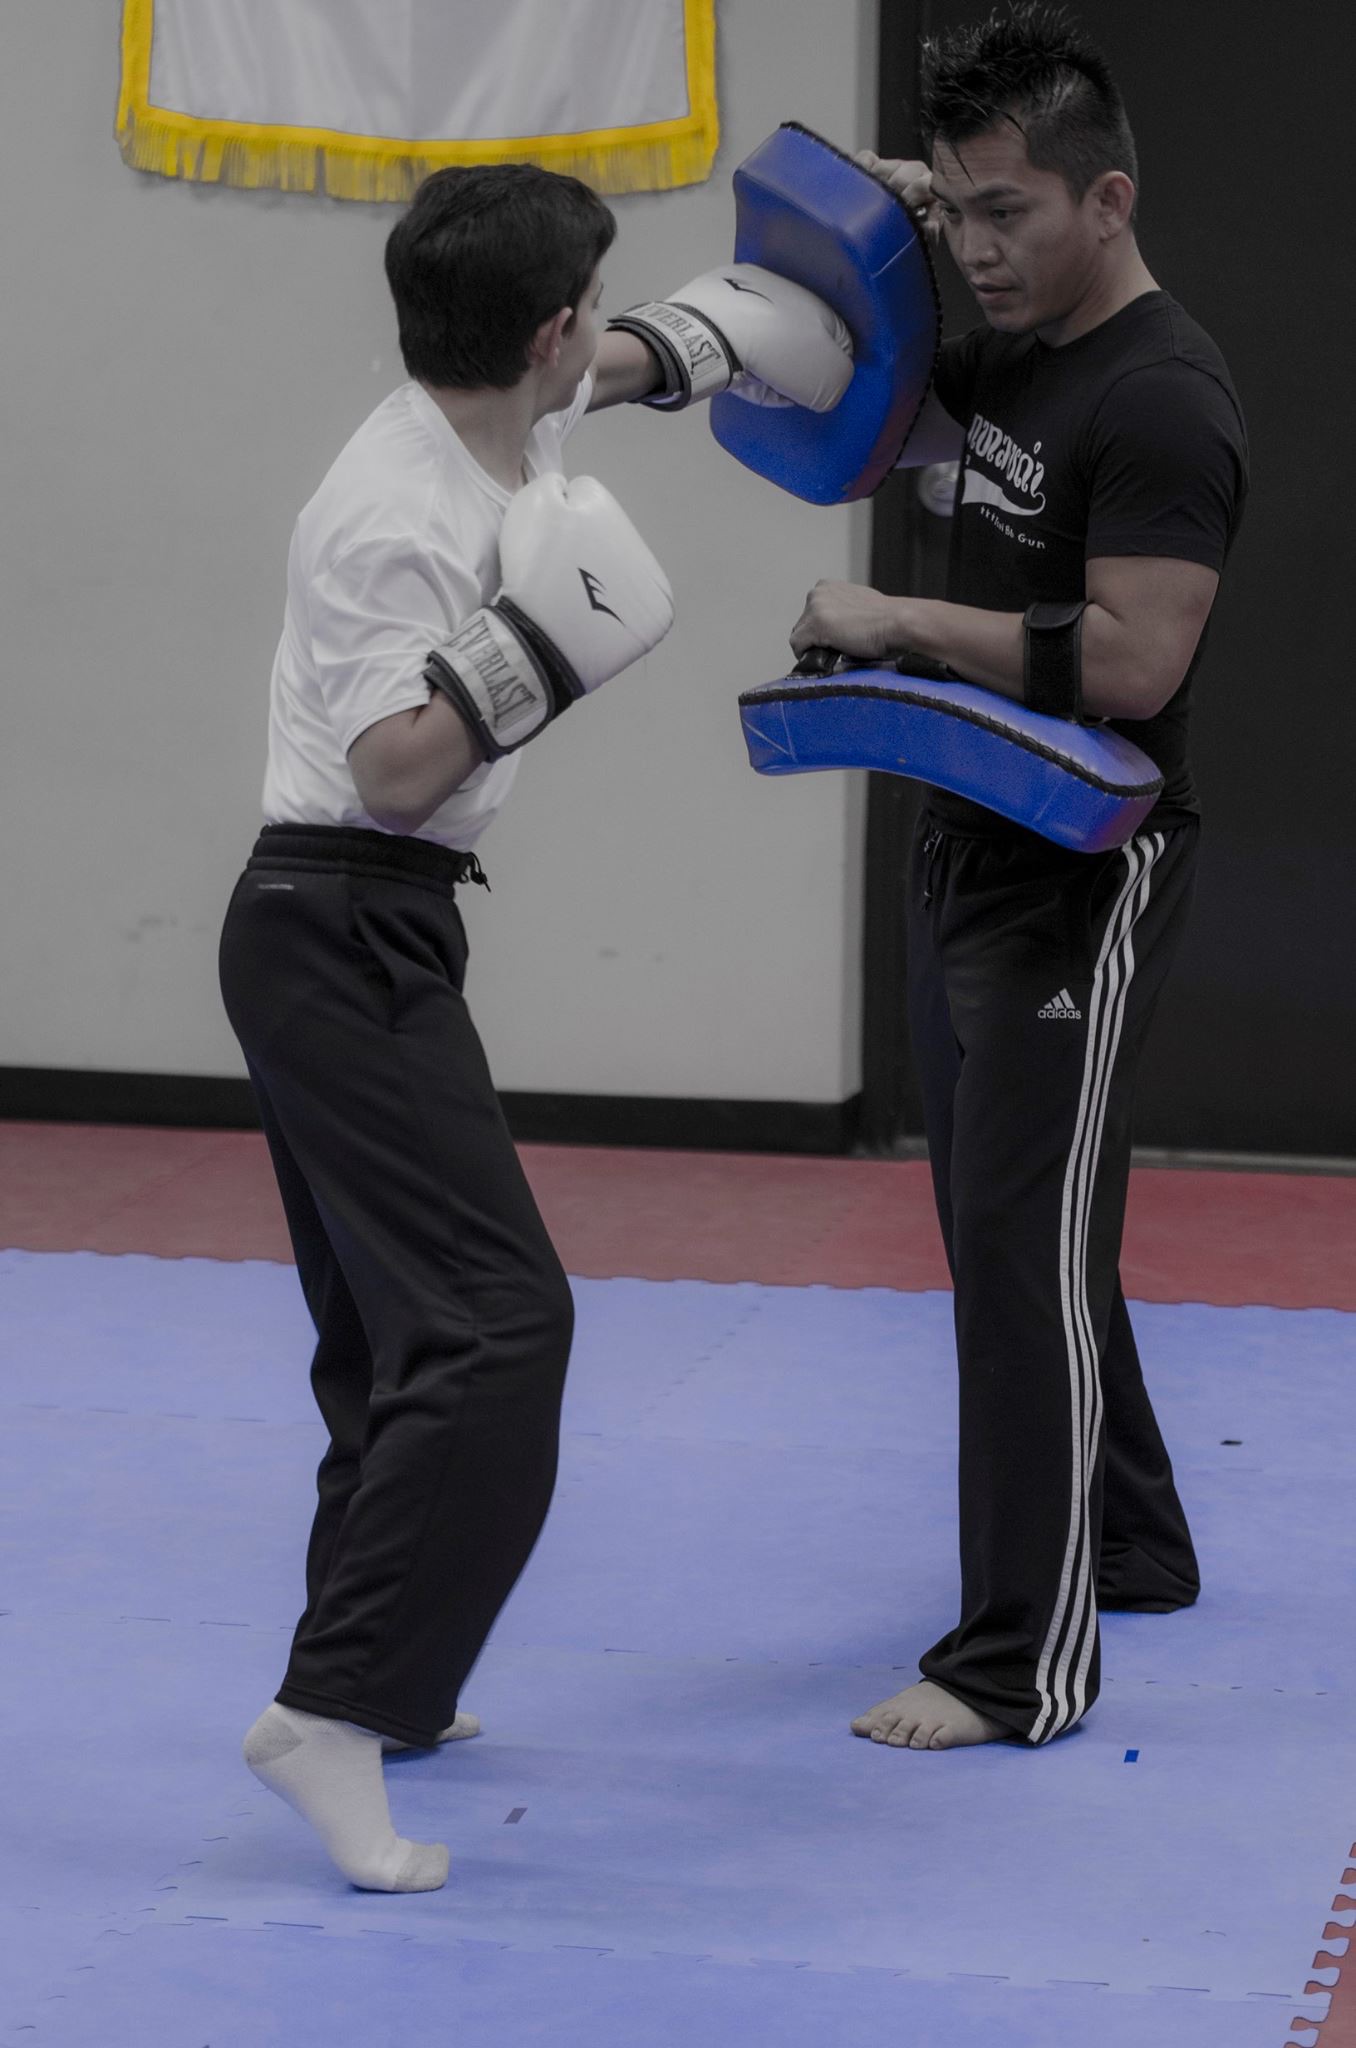 Professional Mixed Martial Arts Training with my personal trainer.